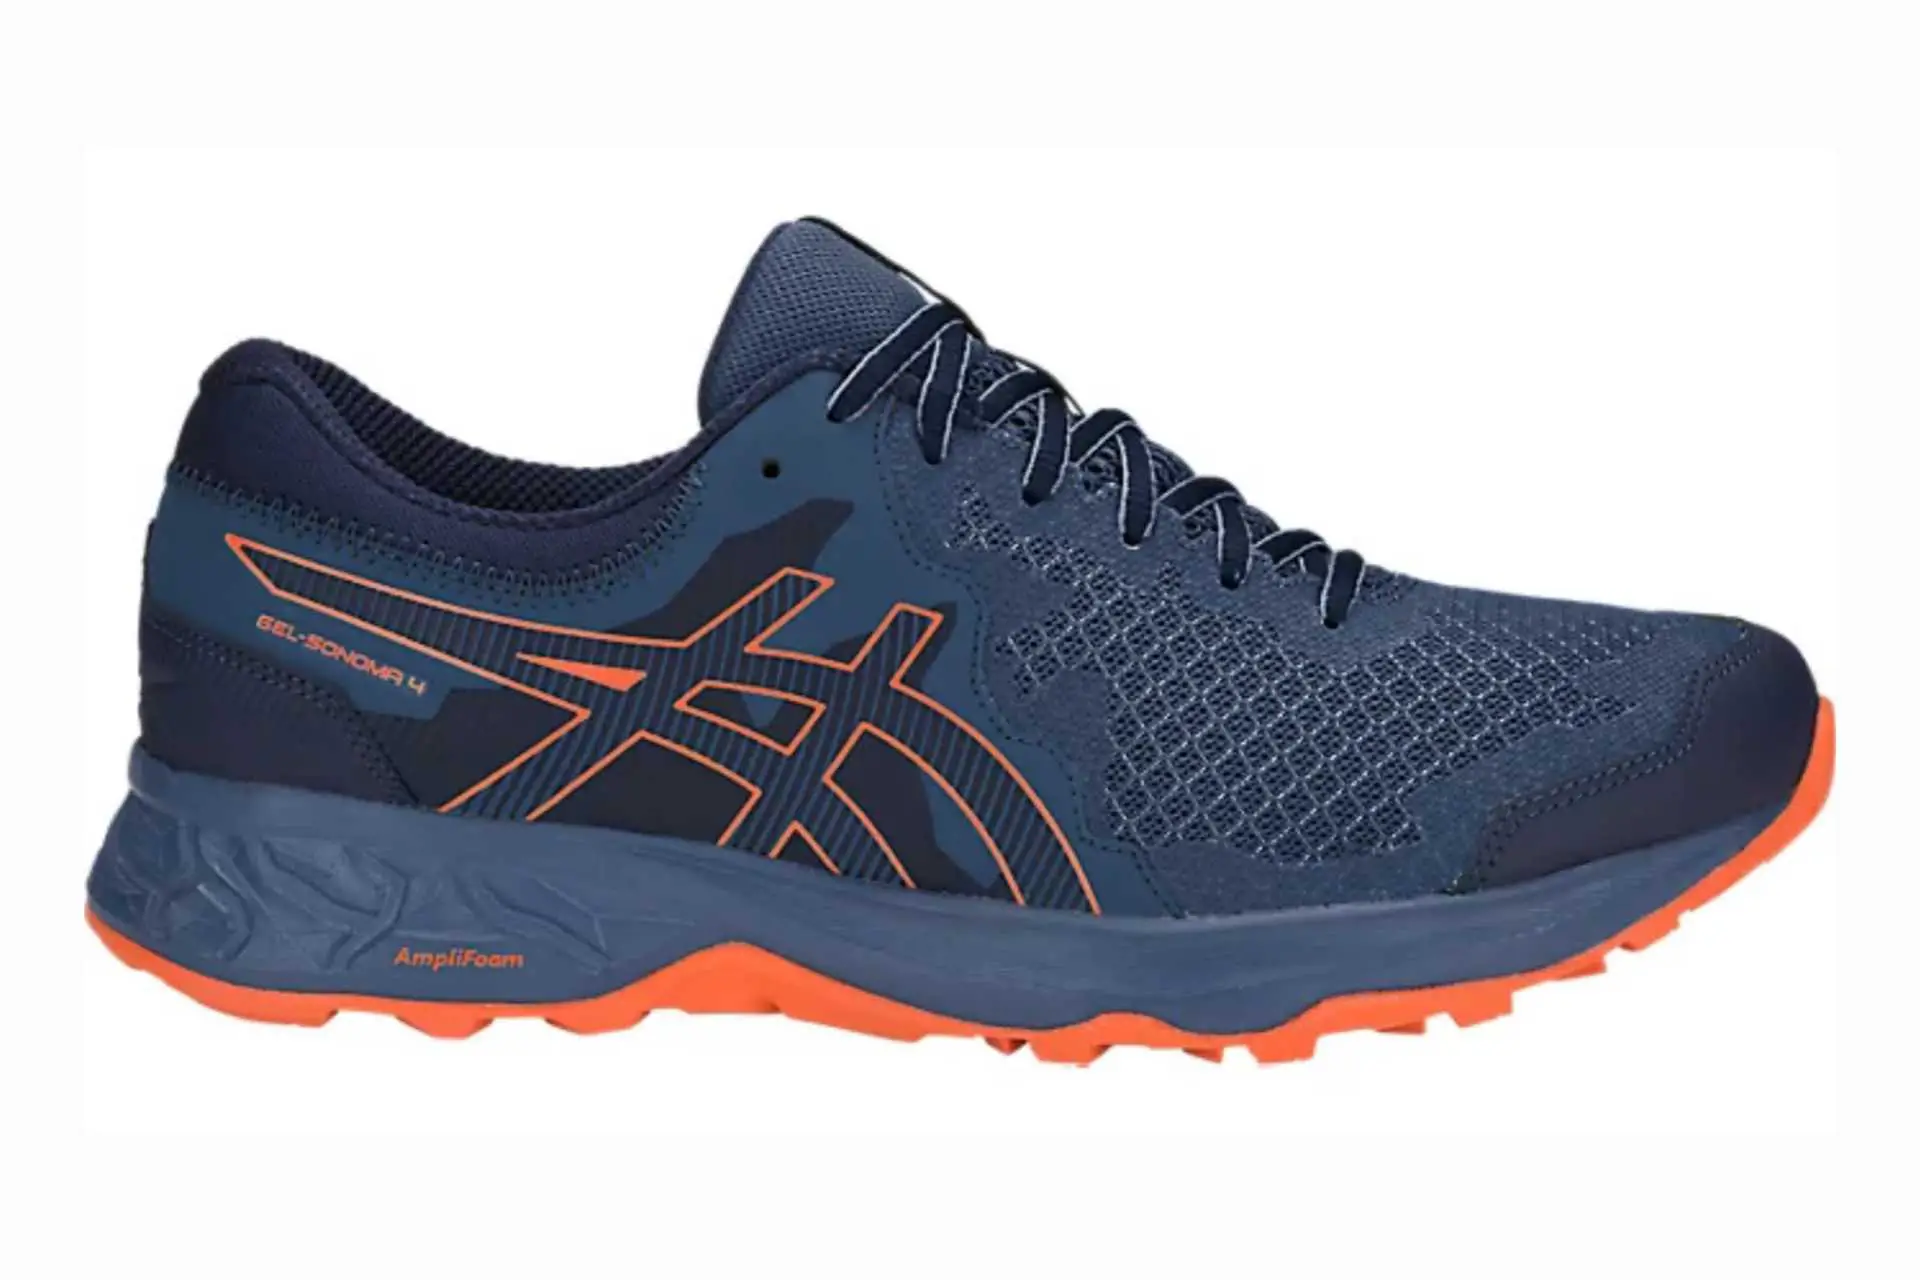 Arch support ASICS shoes